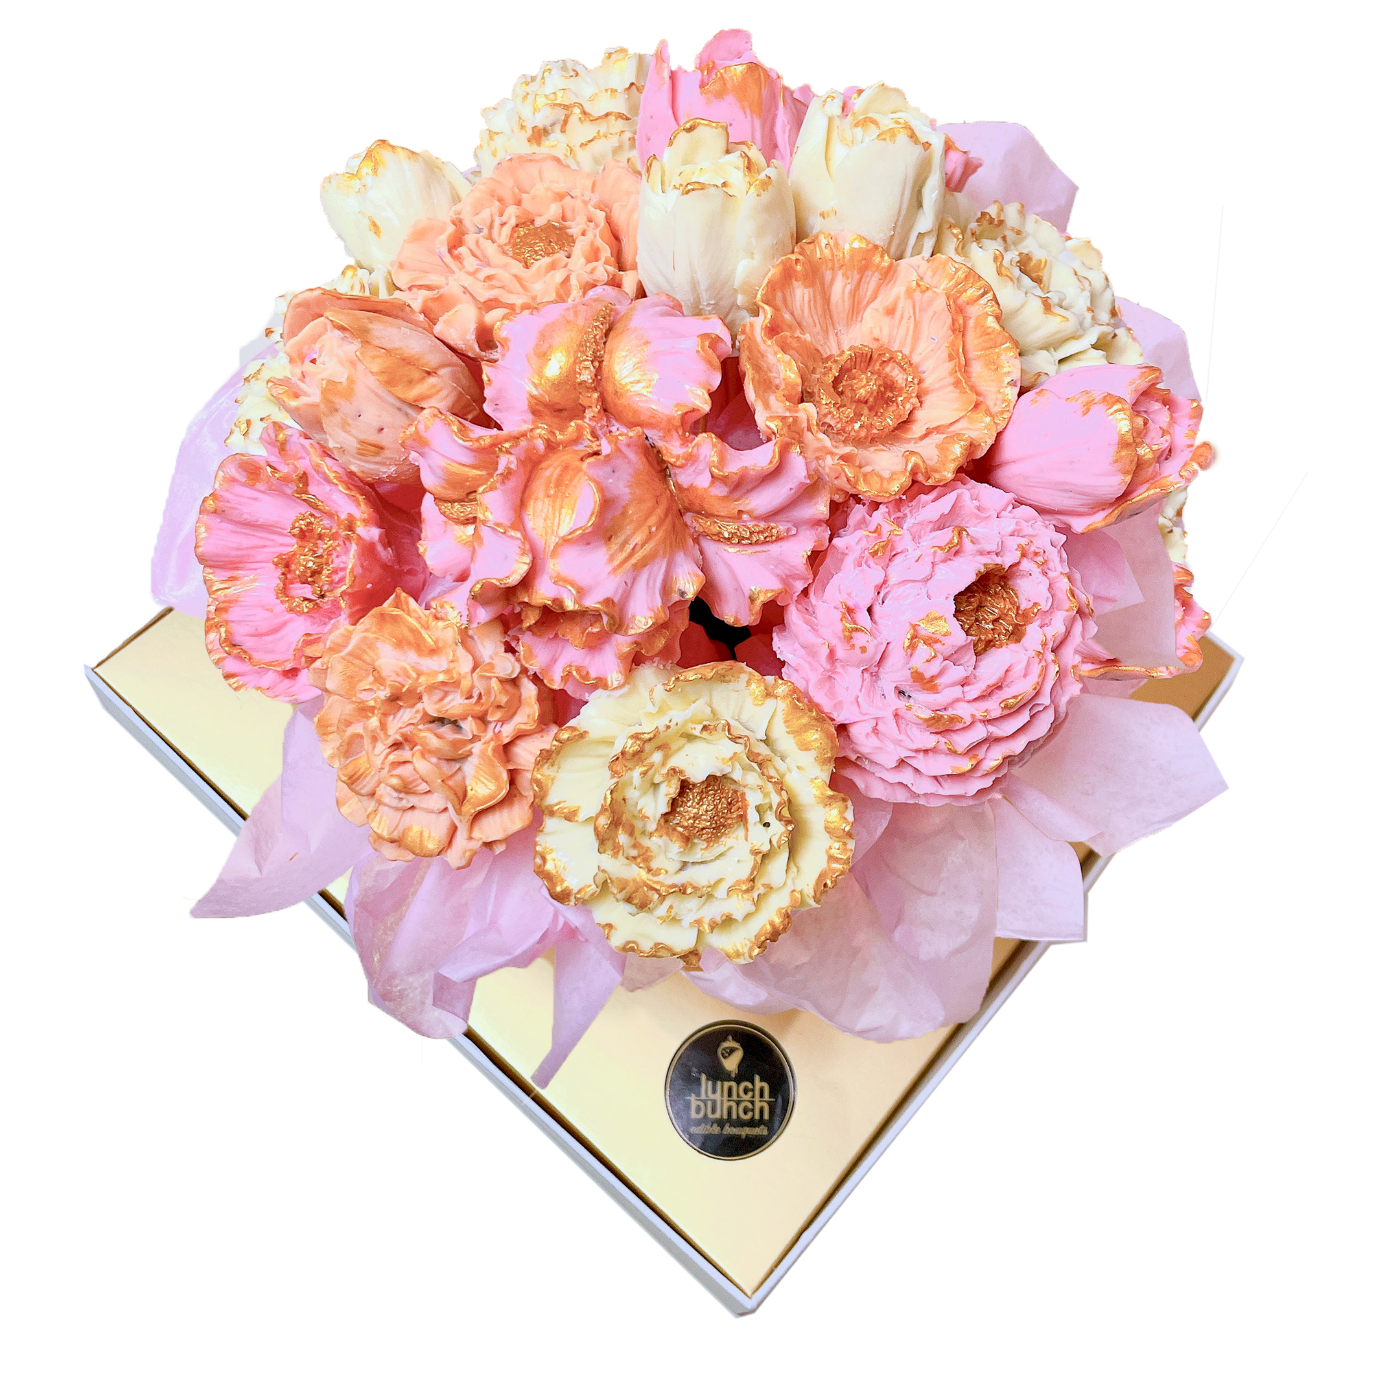 Chocolate flowers bouquets , same day deliveries desert boxes, Online flower delivery, chocolate gifts delivered here